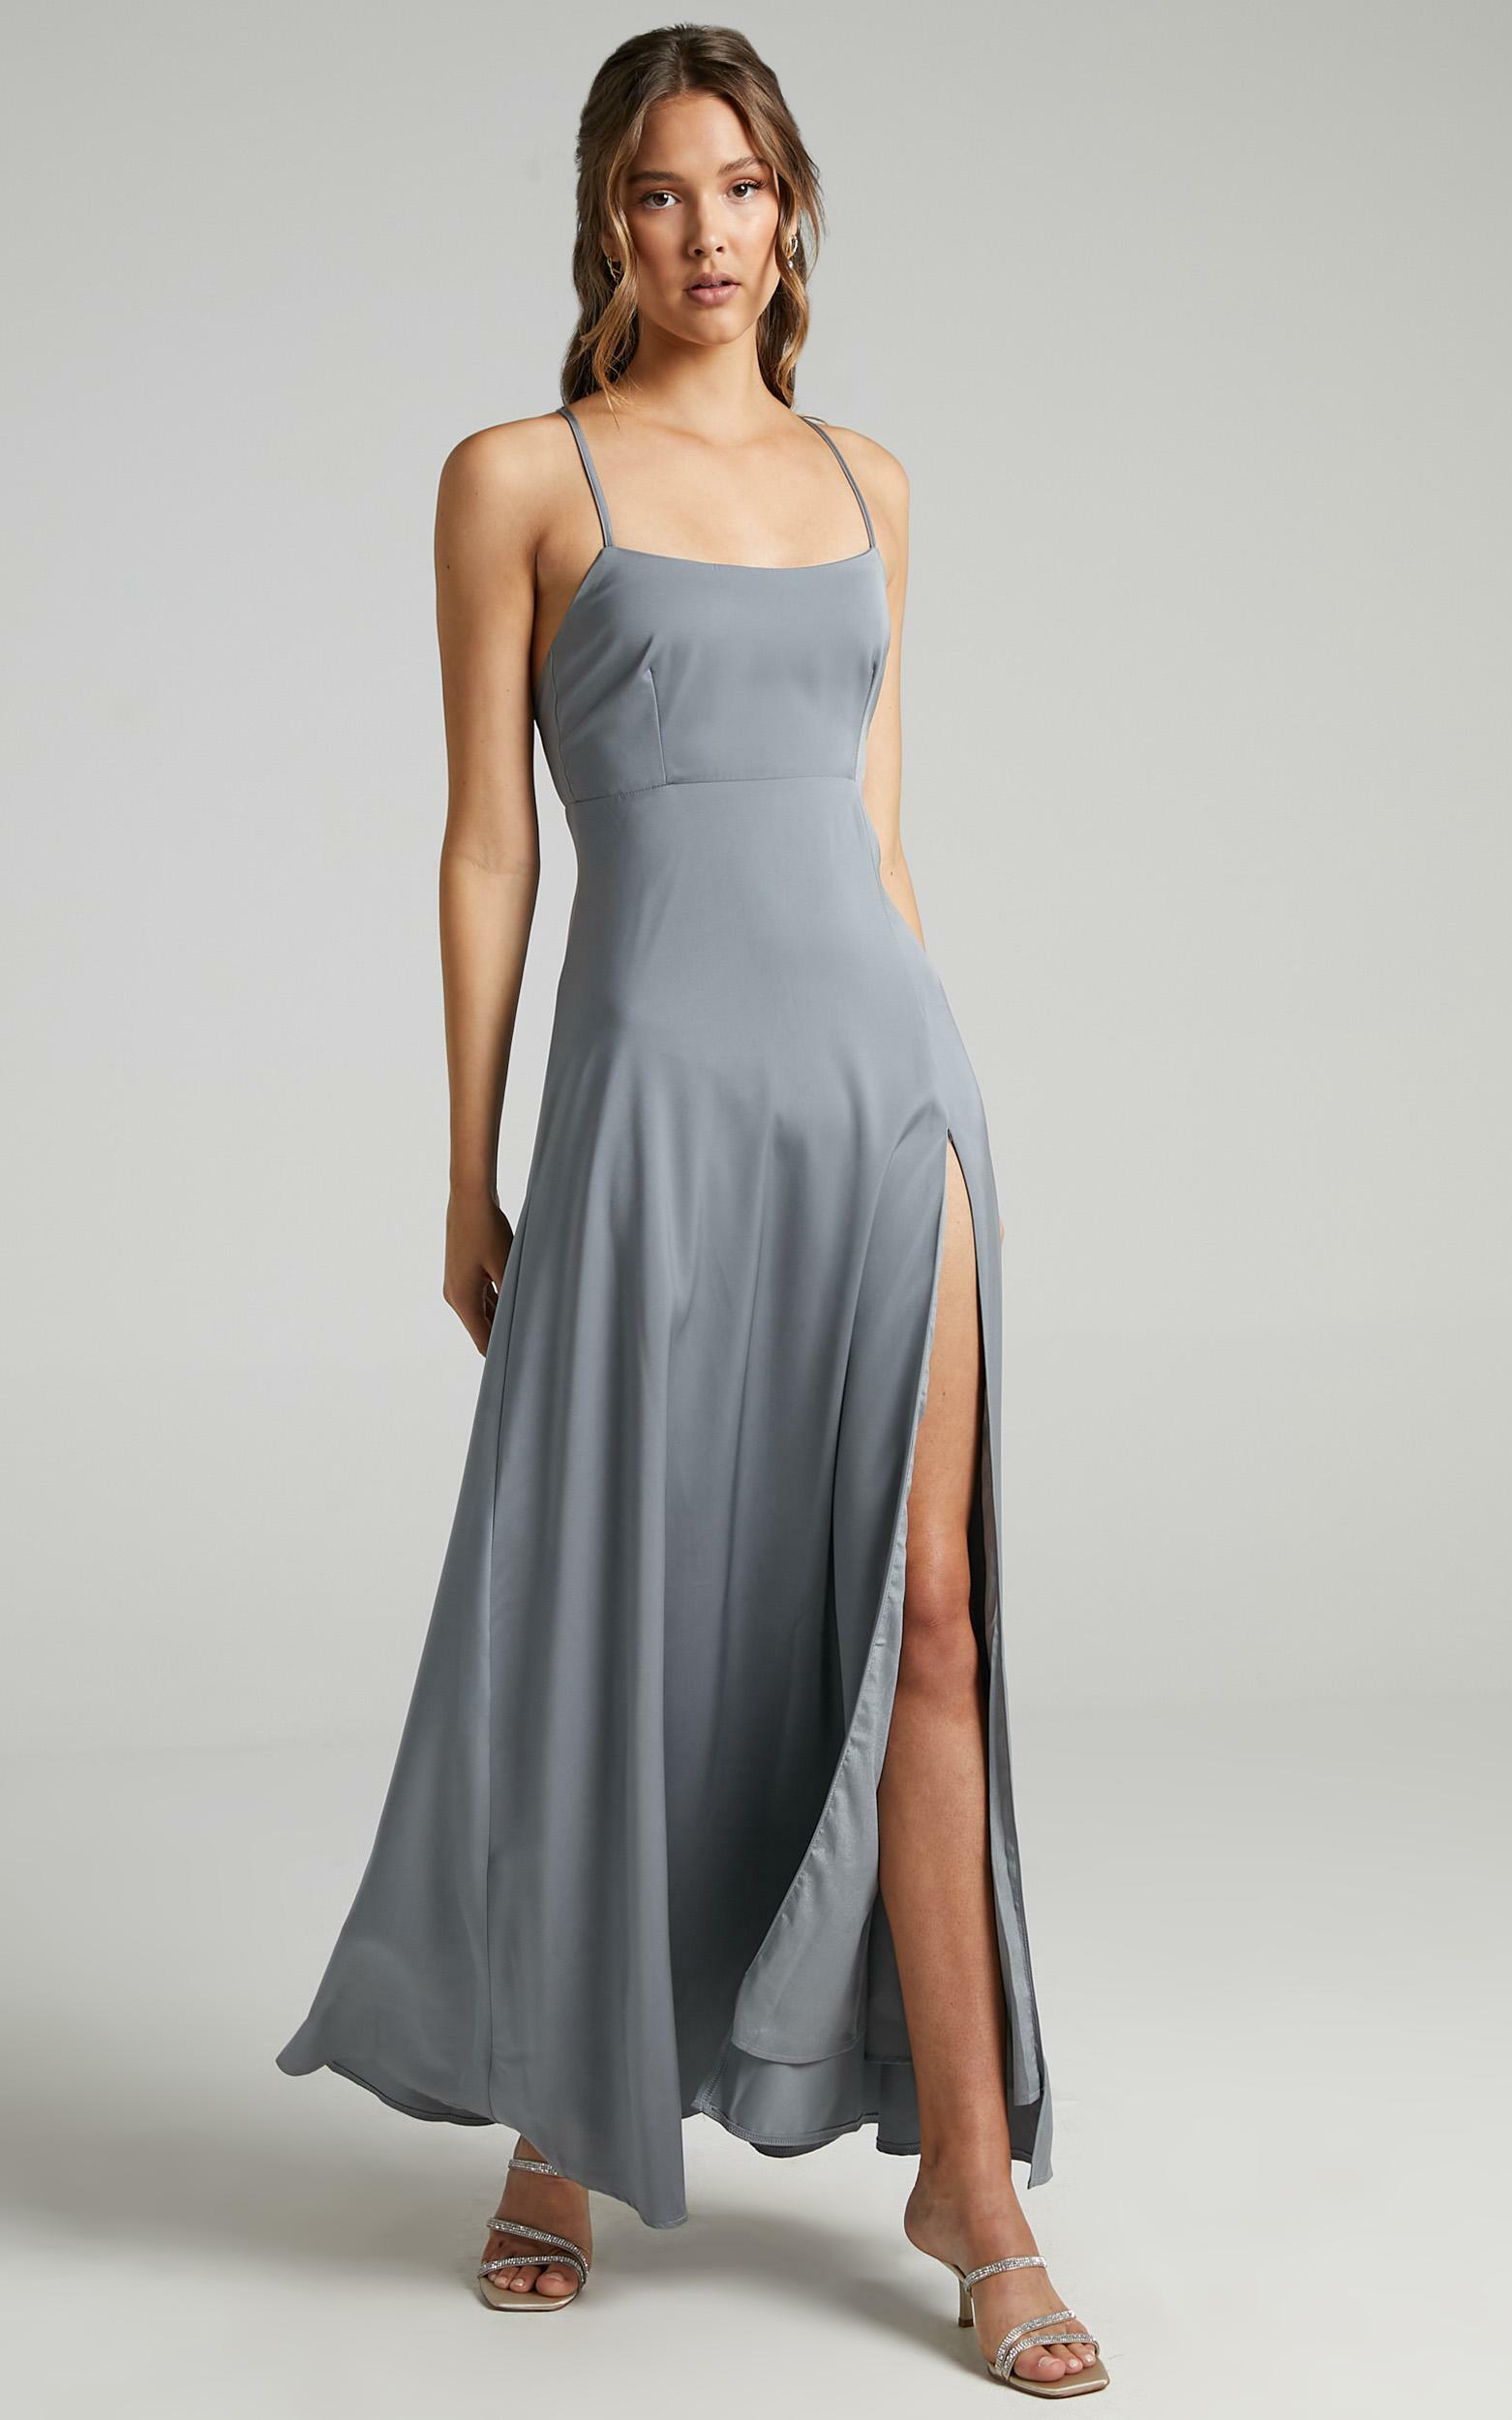 Will It Be Us Dress in Dusty Blue - 20, BLU2, hi-res image number null